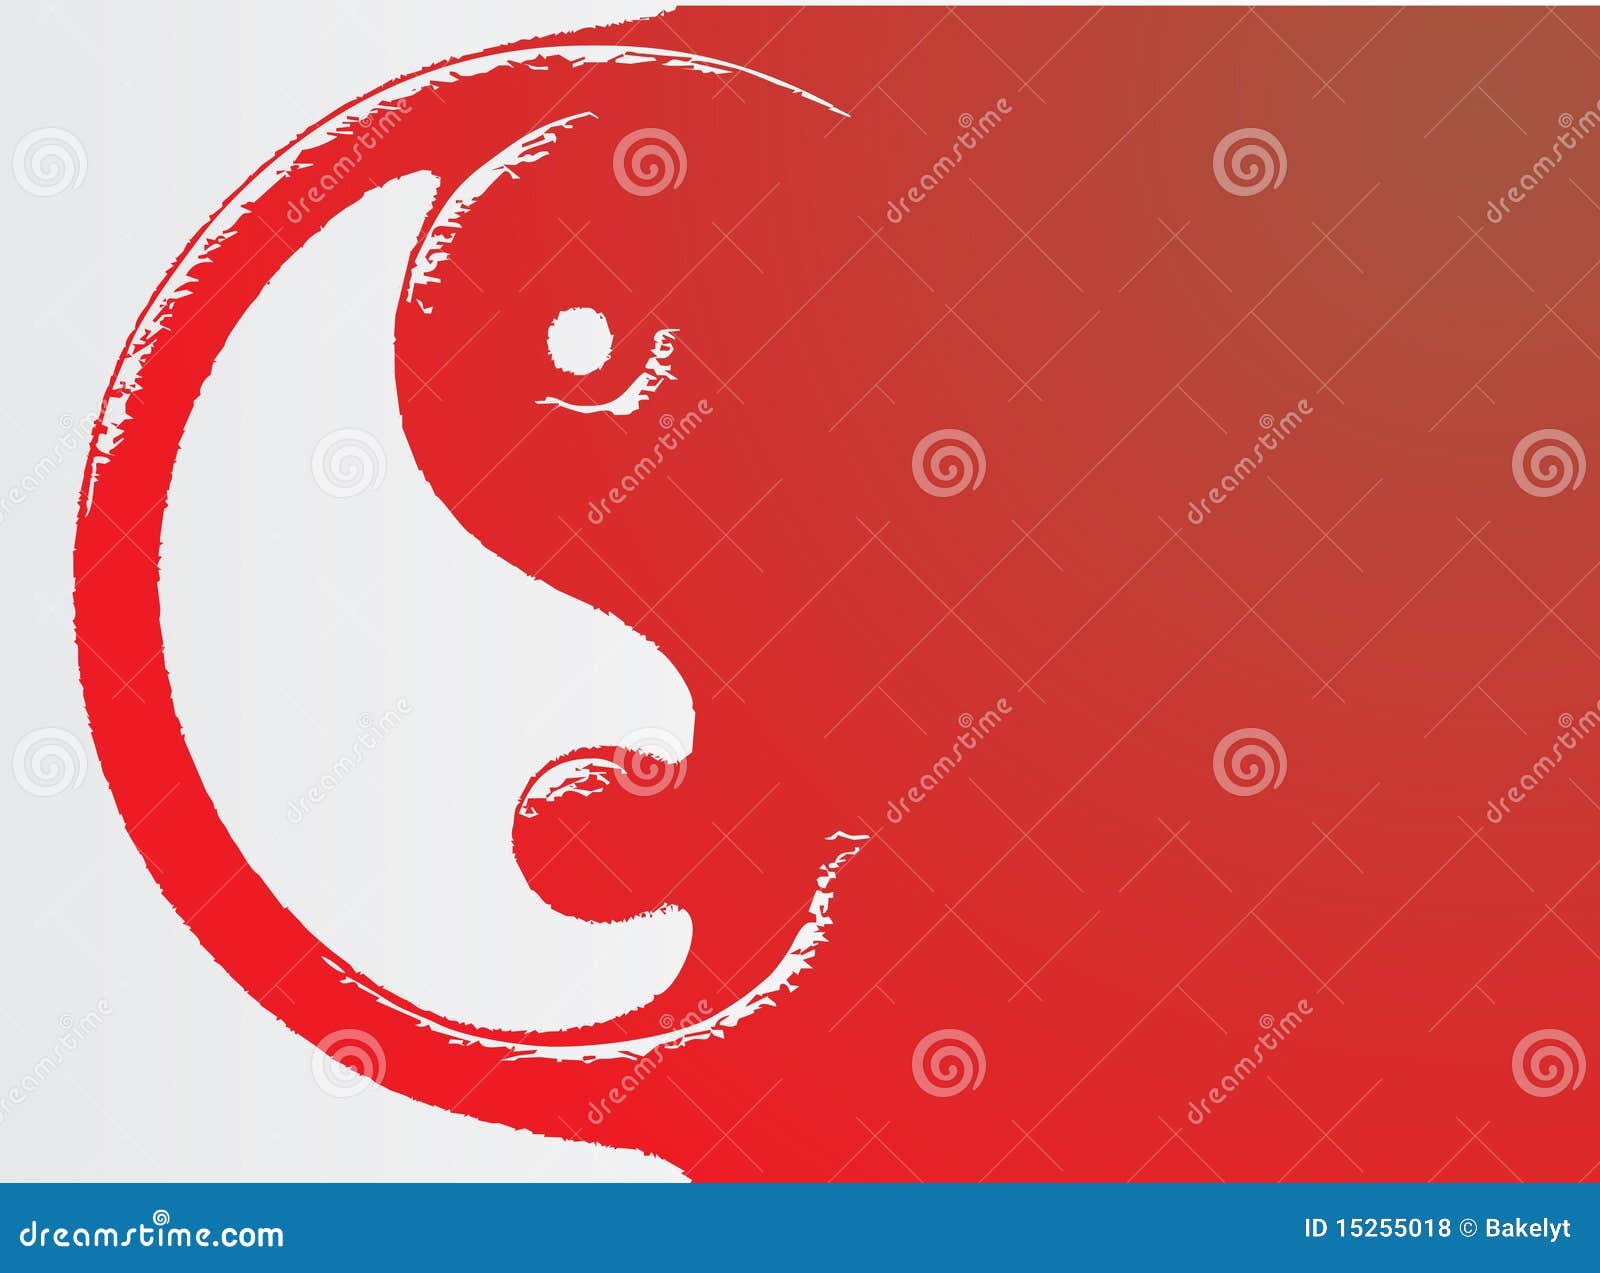 Red Yin Yang stock vector. Illustration of forces, design - 15255018